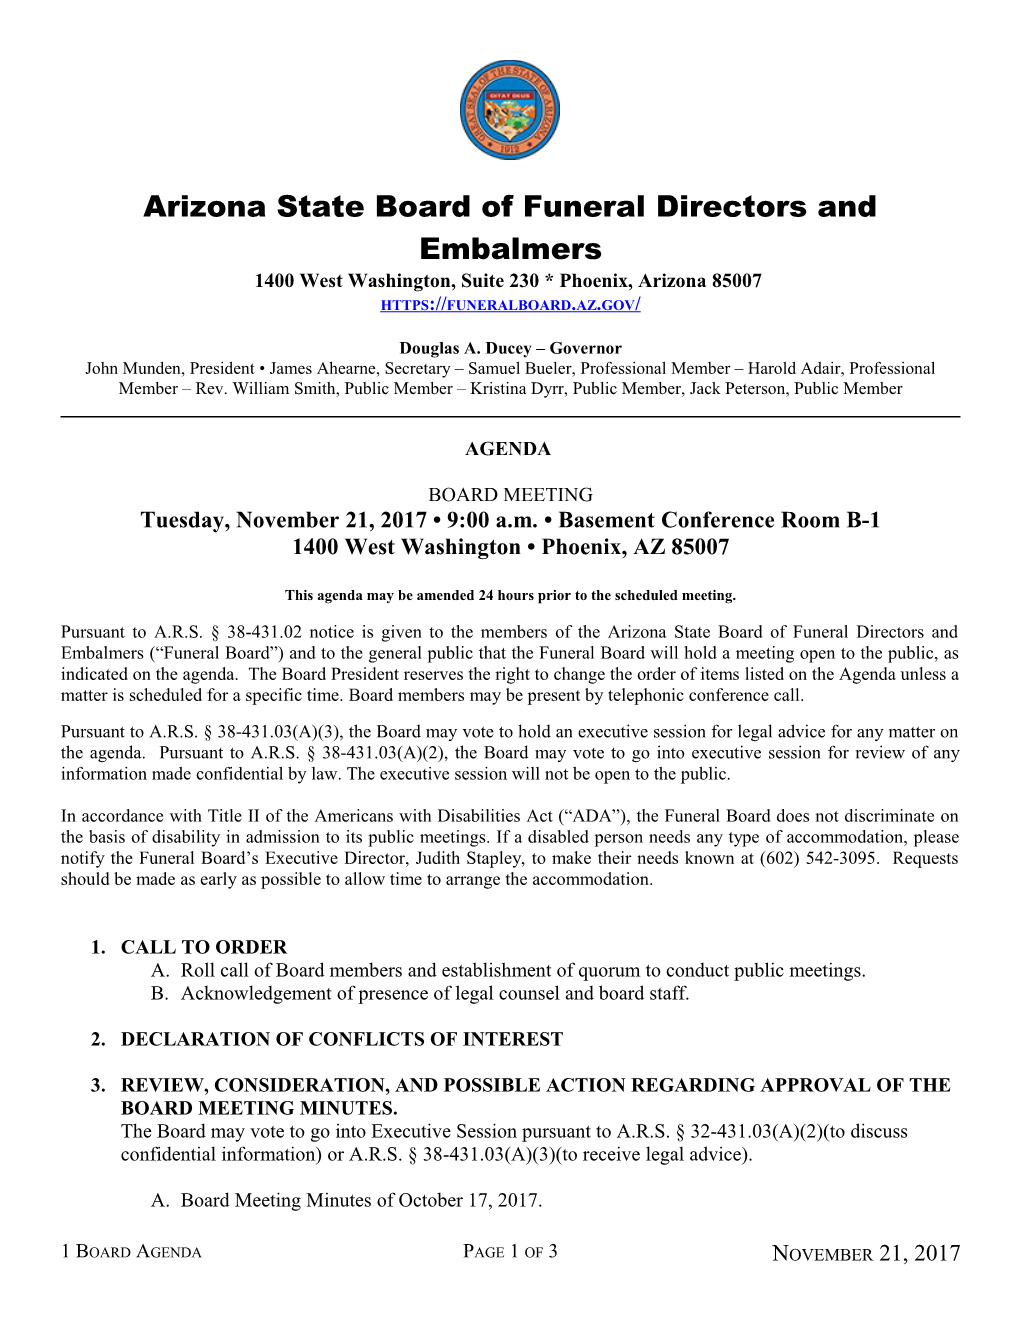 Arizona State Board of Funeral Directors and Embalmers